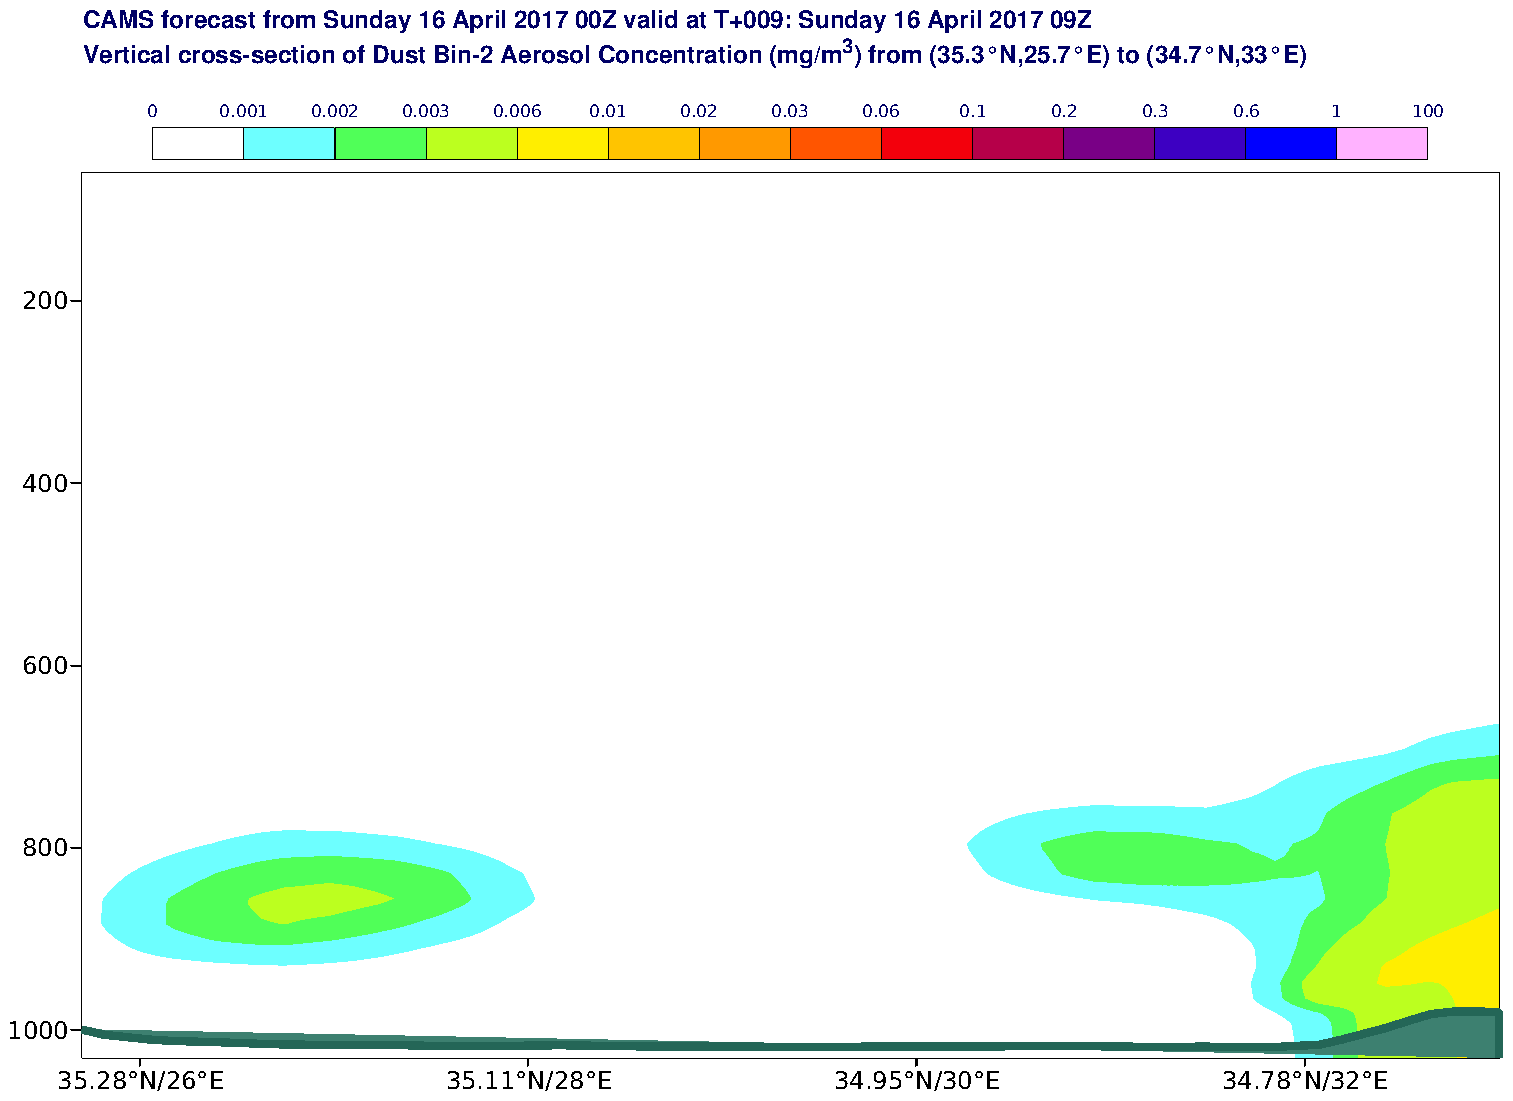 Vertical cross-section of Dust Bin-2 Aerosol Concentration (mg/m3) valid at T9 - 2017-04-16 09:00